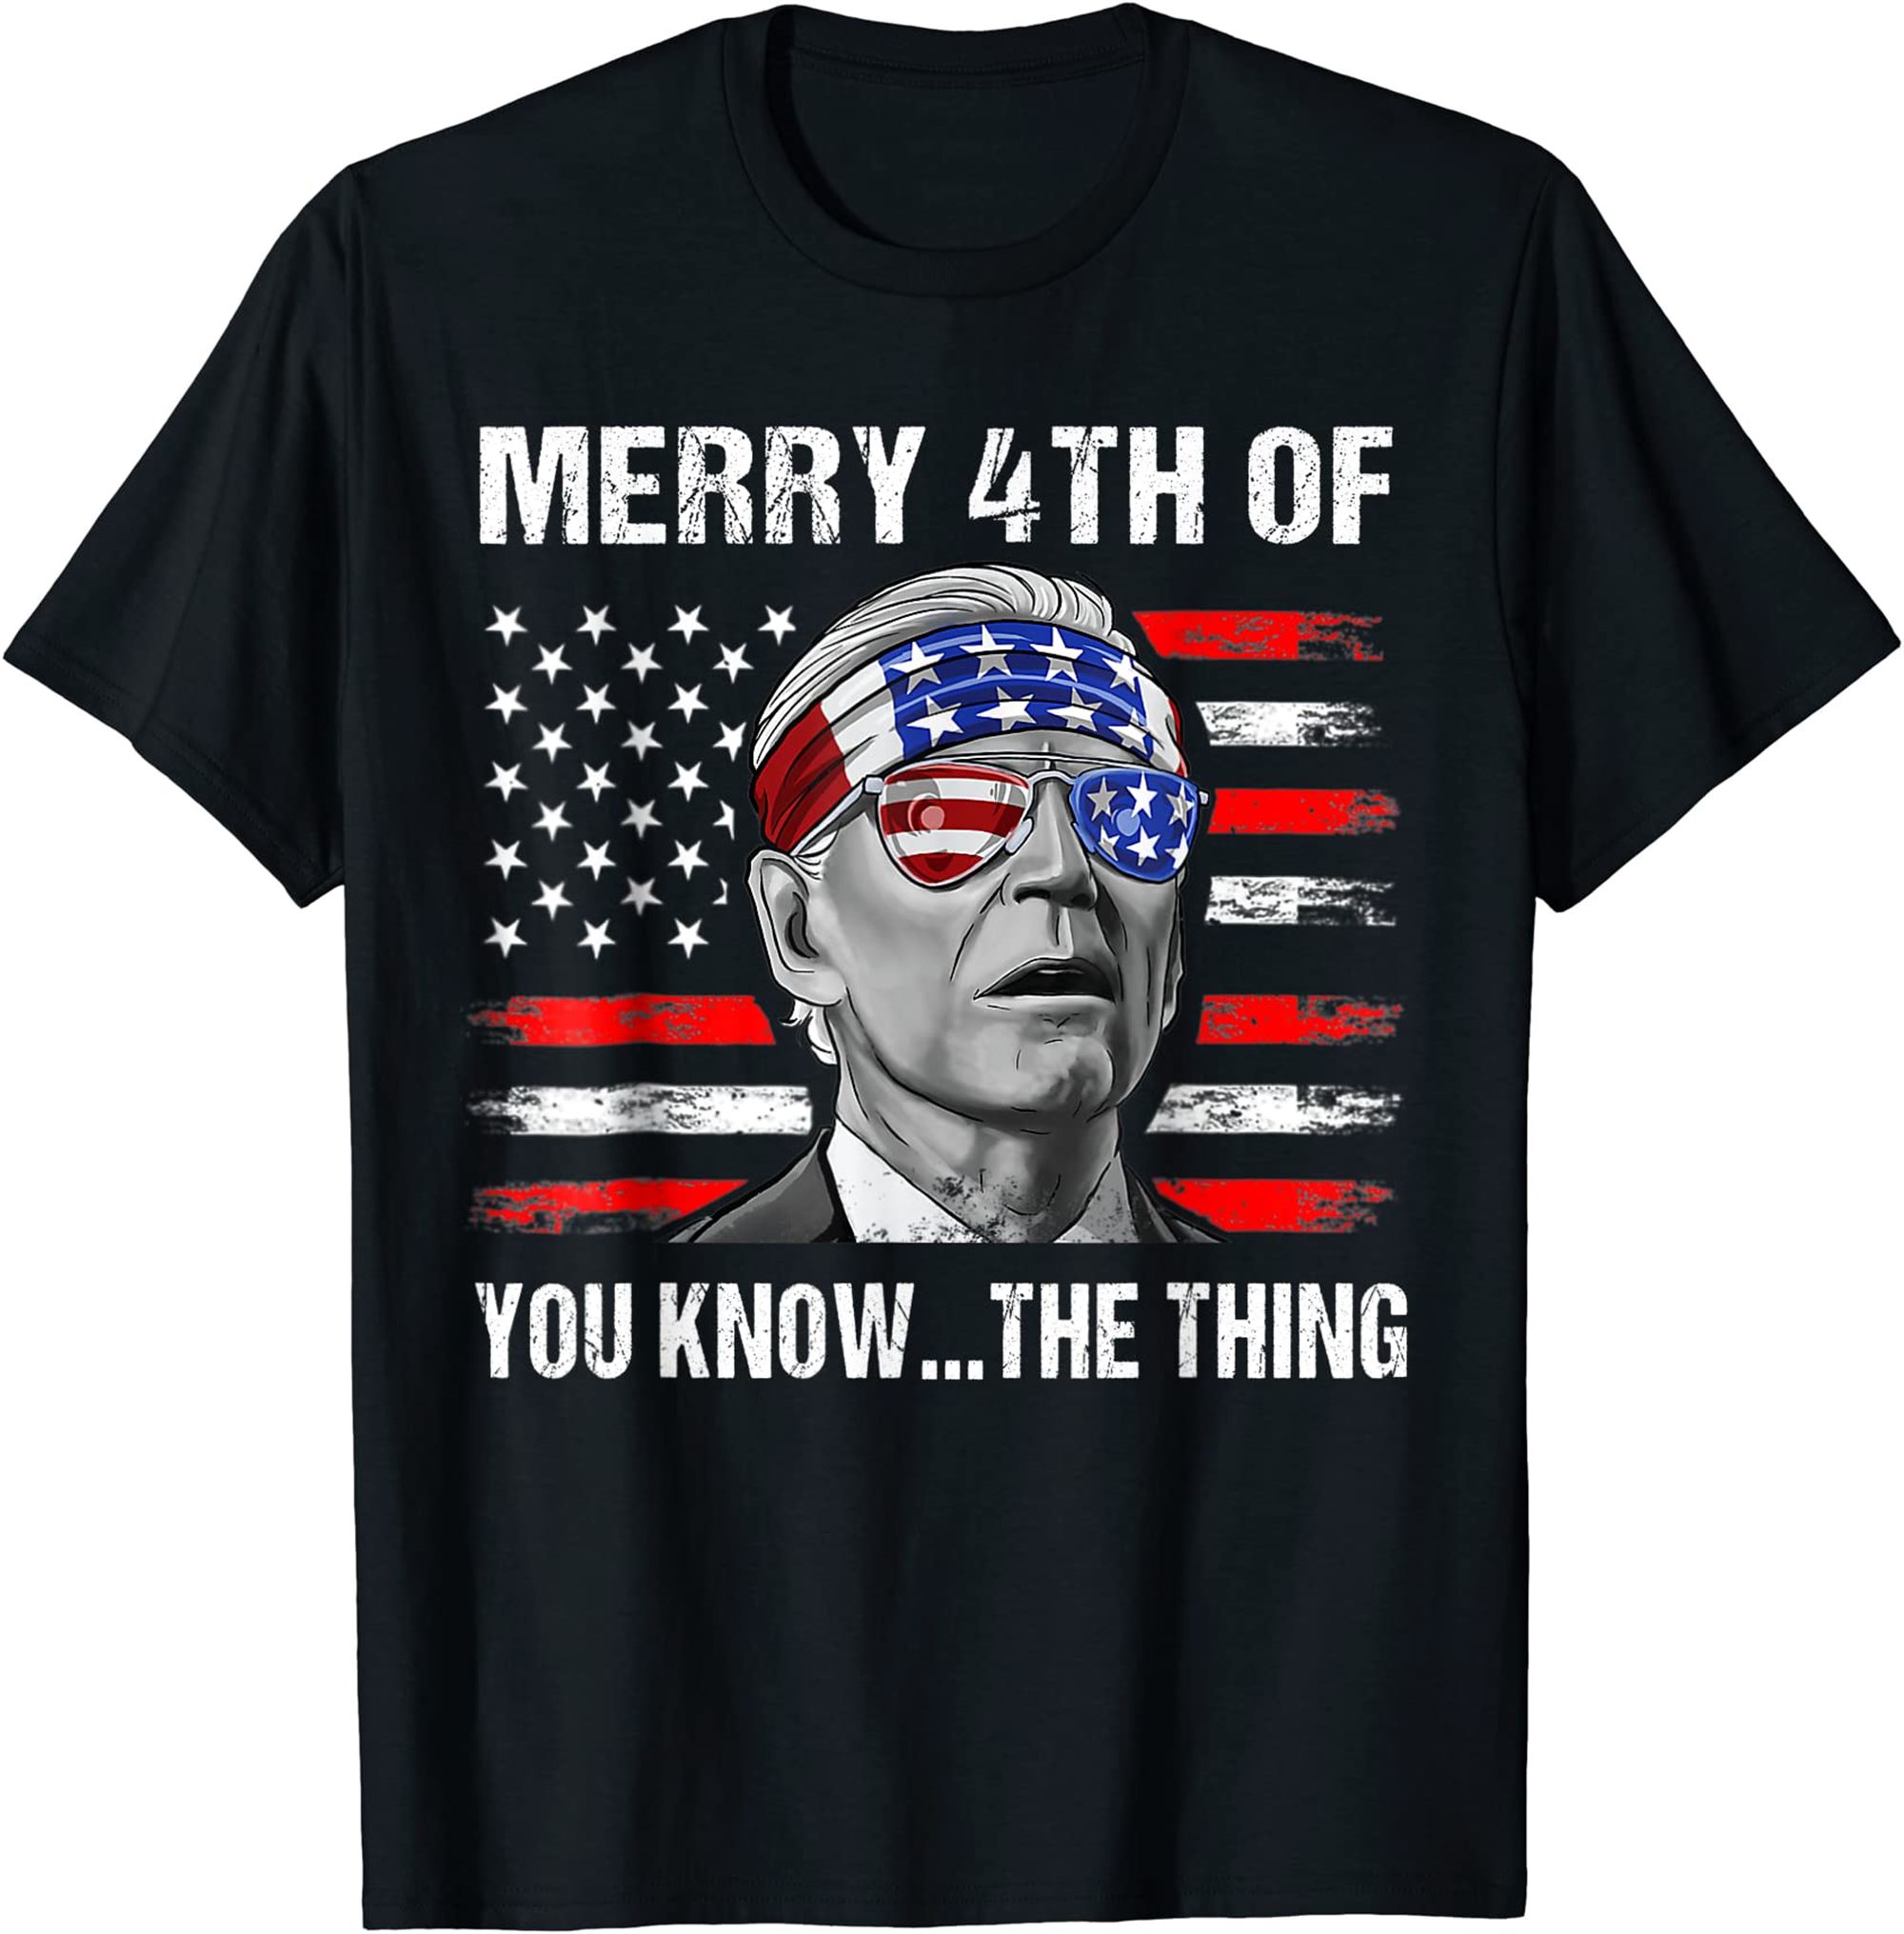 Biden 4th Of July Shirt Merry 4th Of You Know The Thing T-shirt Size Up To 5xl